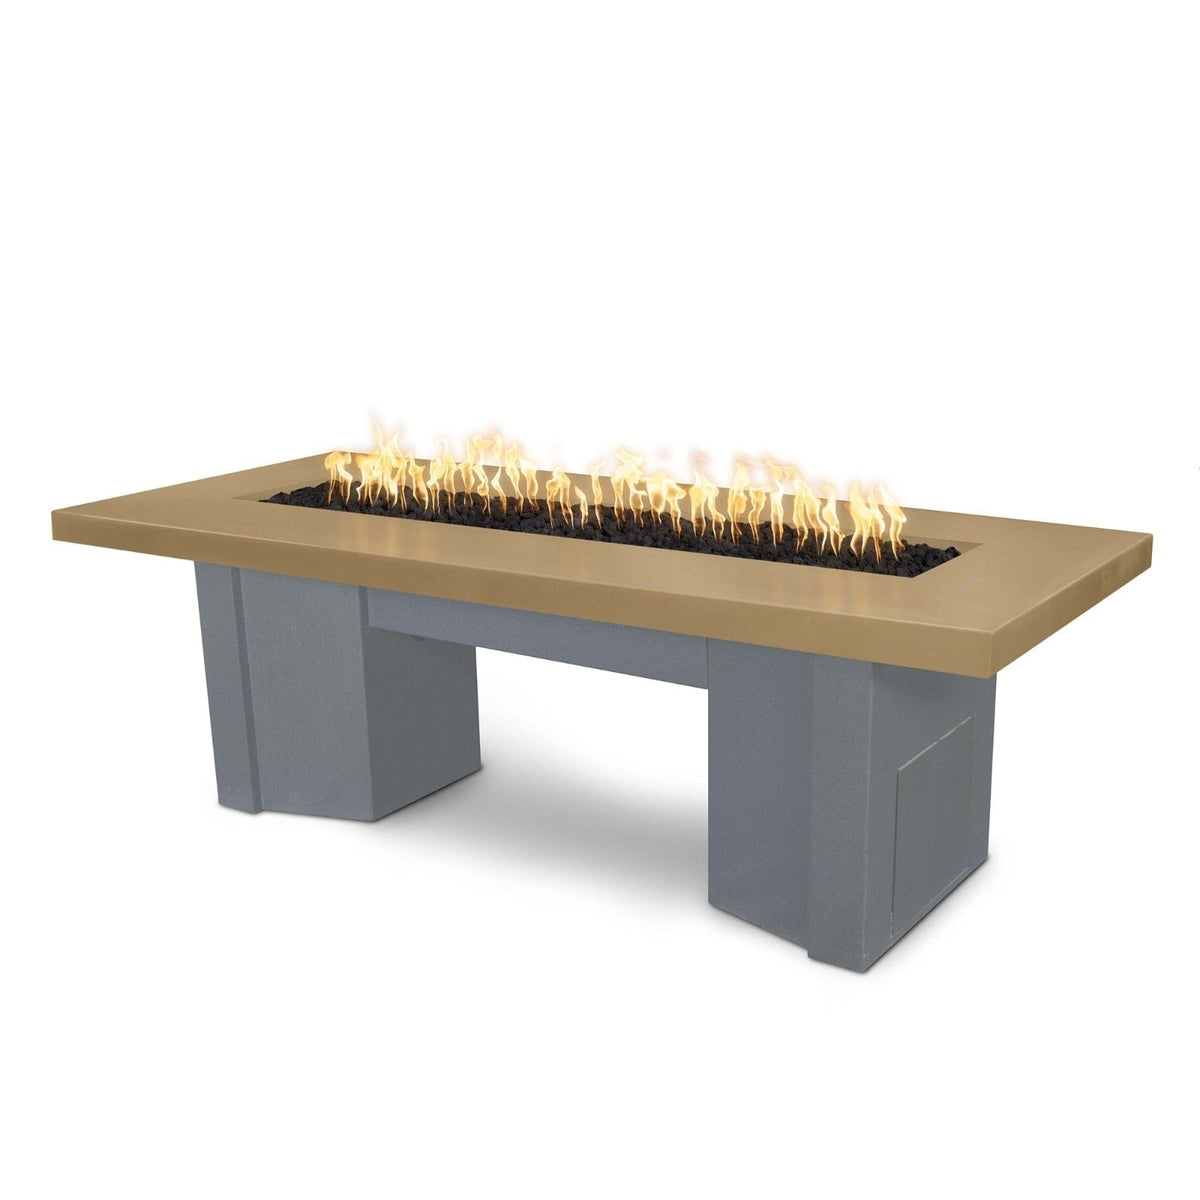 The Outdoor Plus Fire Features Brown (-BRN) / Gray Powder Coated Steel (-GRY) The Outdoor Plus 78&quot; Alameda Fire Table Smooth Concrete in Liquid Propane - 12V Electronic Ignition / OPT-ALMGFRC78E12V-LP